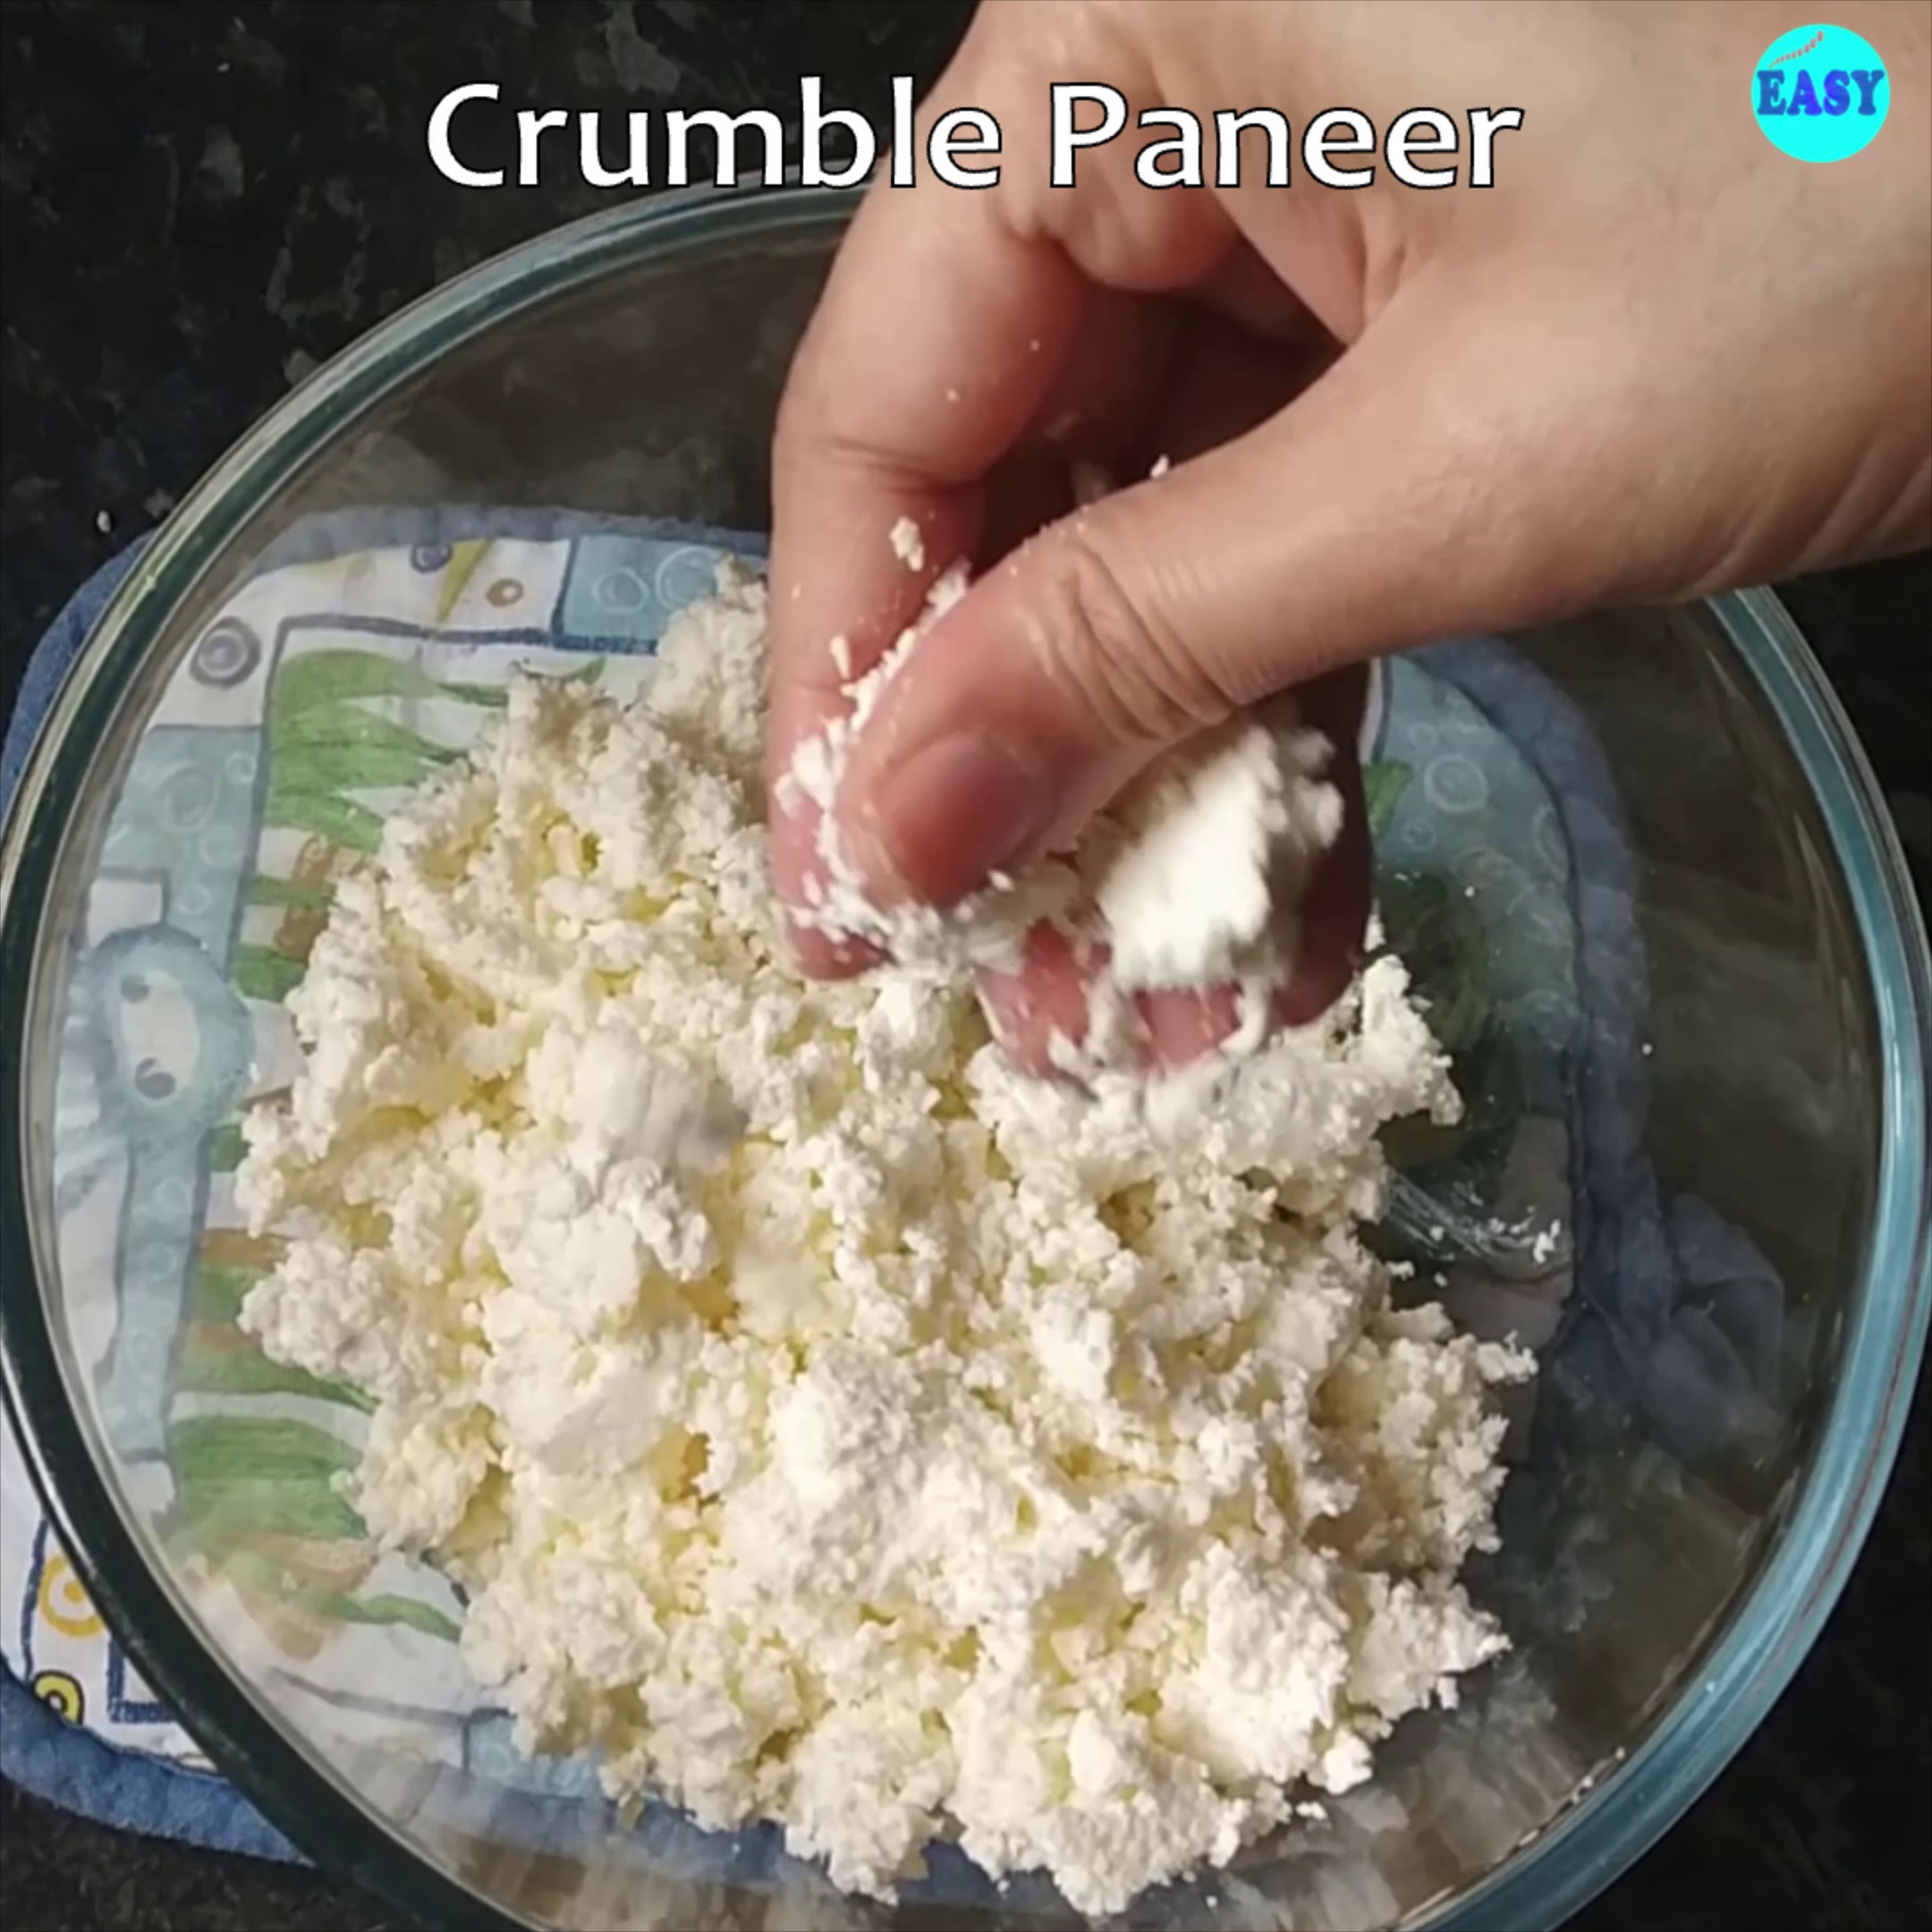 Step 1 - Crumble the paneer or grate it.